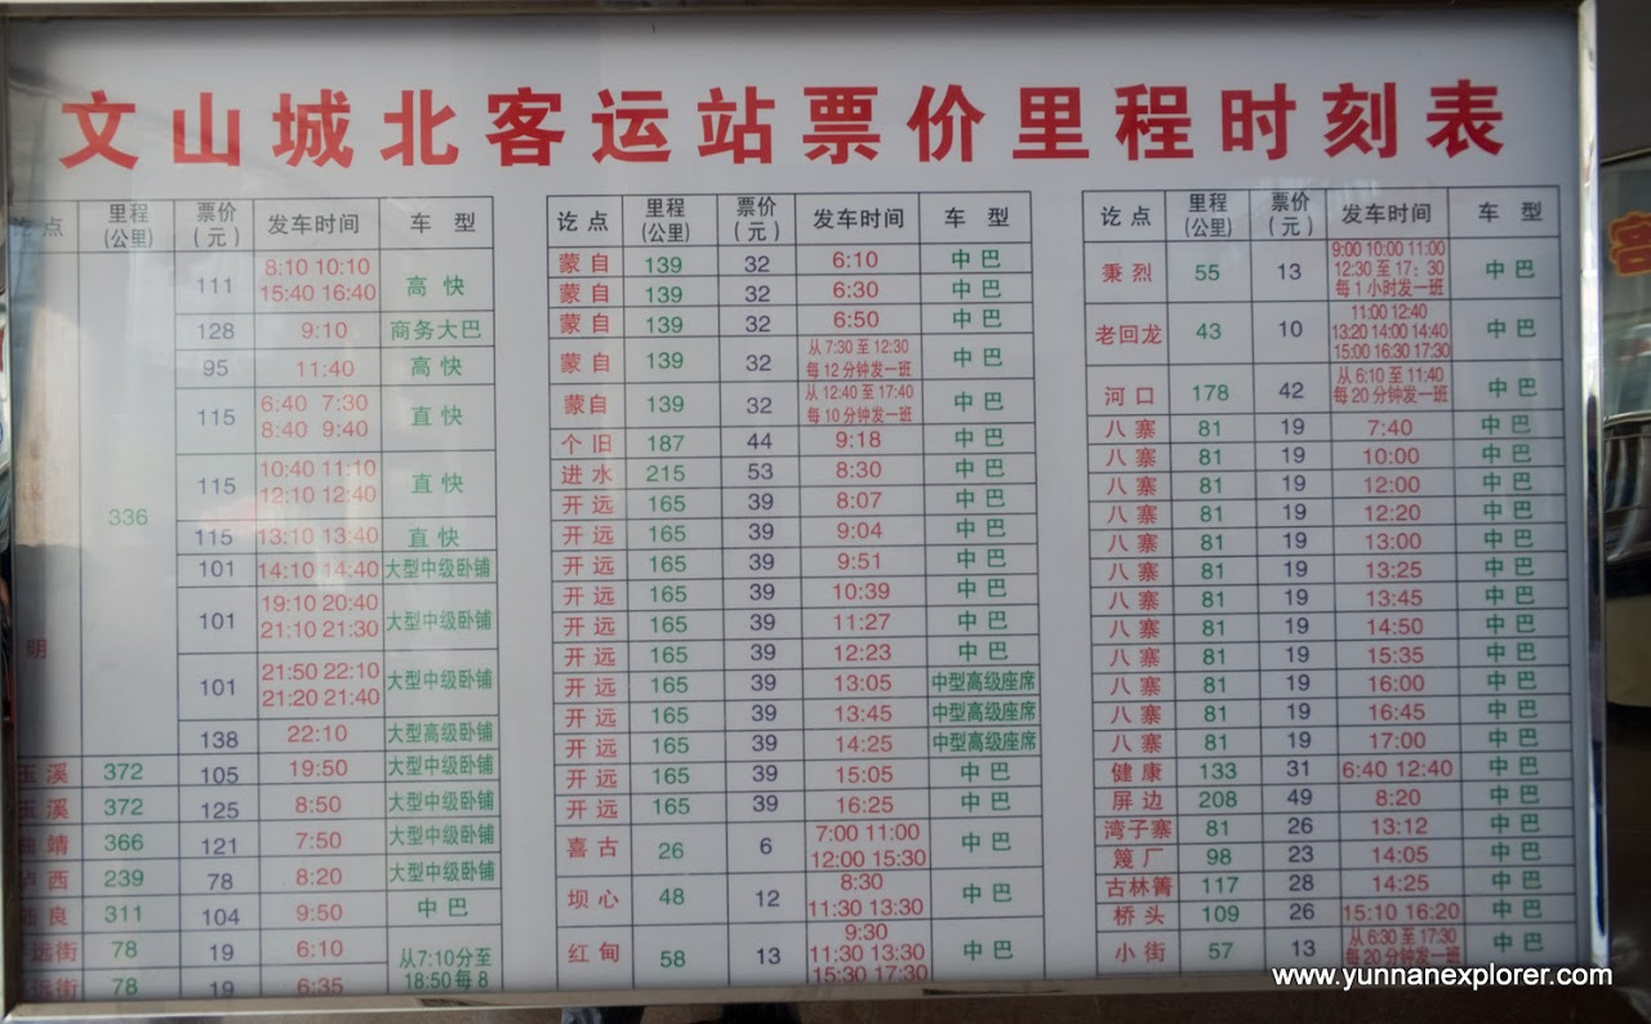 Picture: Busses for destinations north of Wenshan: Kunming, Mengzi, Pingyuan, Kaiyuan.;The northern terminal has connections to Kunming, Mengzi, Pingyuan and other destinations north of Wenshan. 